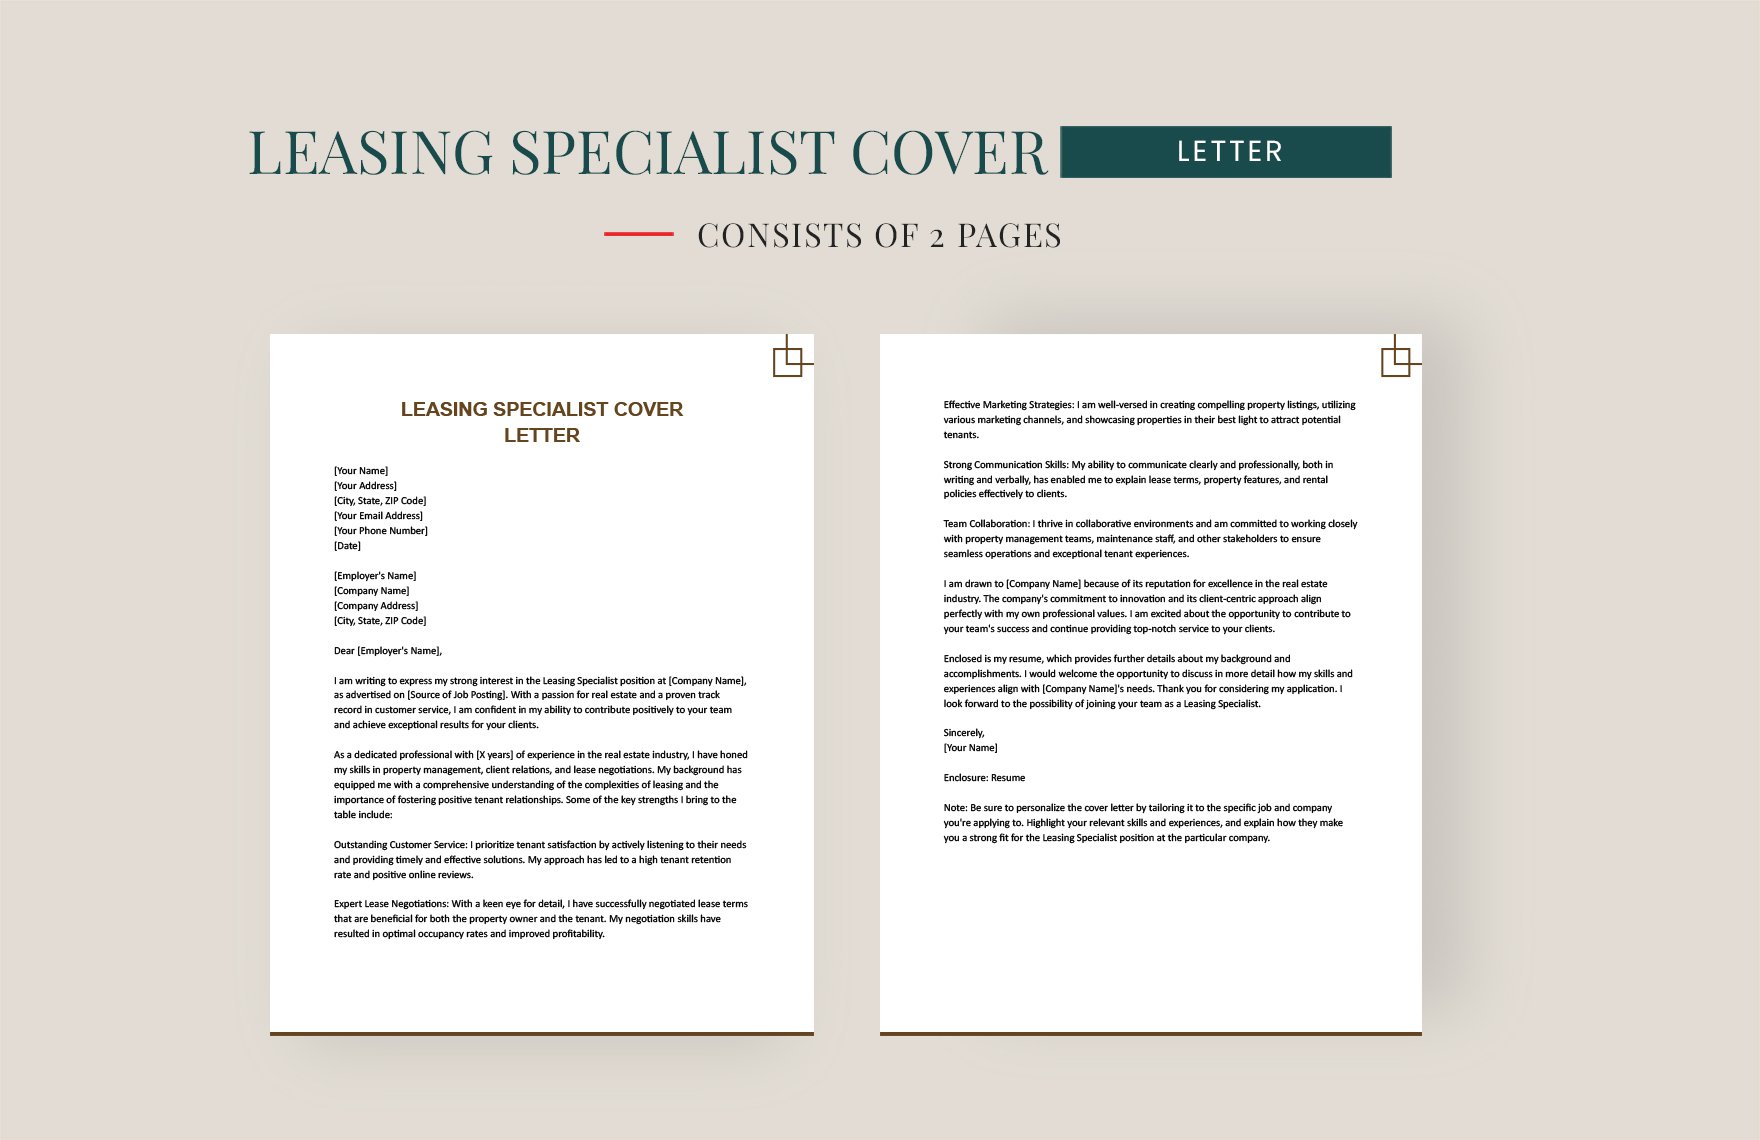 Leasing Specialist Cover Letter in Word, Google Docs